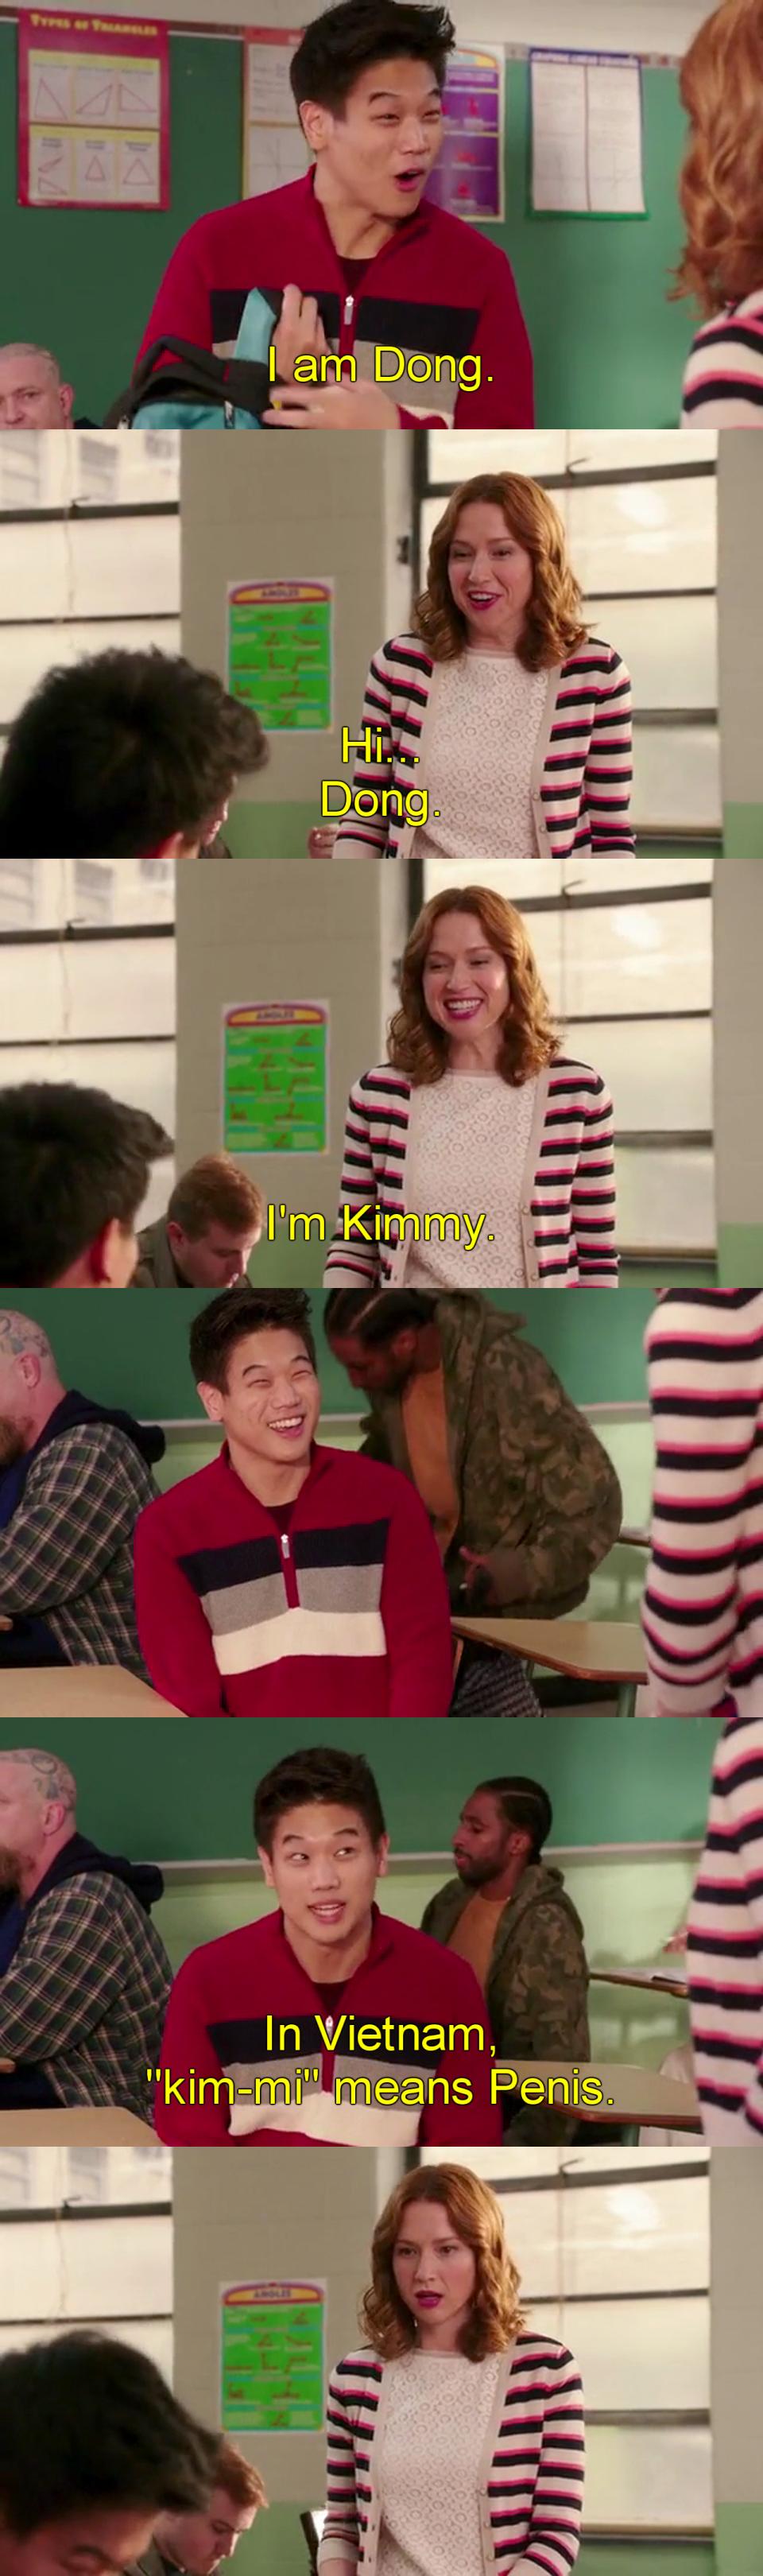 kimmy schmidt dong means penis - I am Dong. Dong. I'm Kimmy In Vietnam, "kimmi" means Penis.